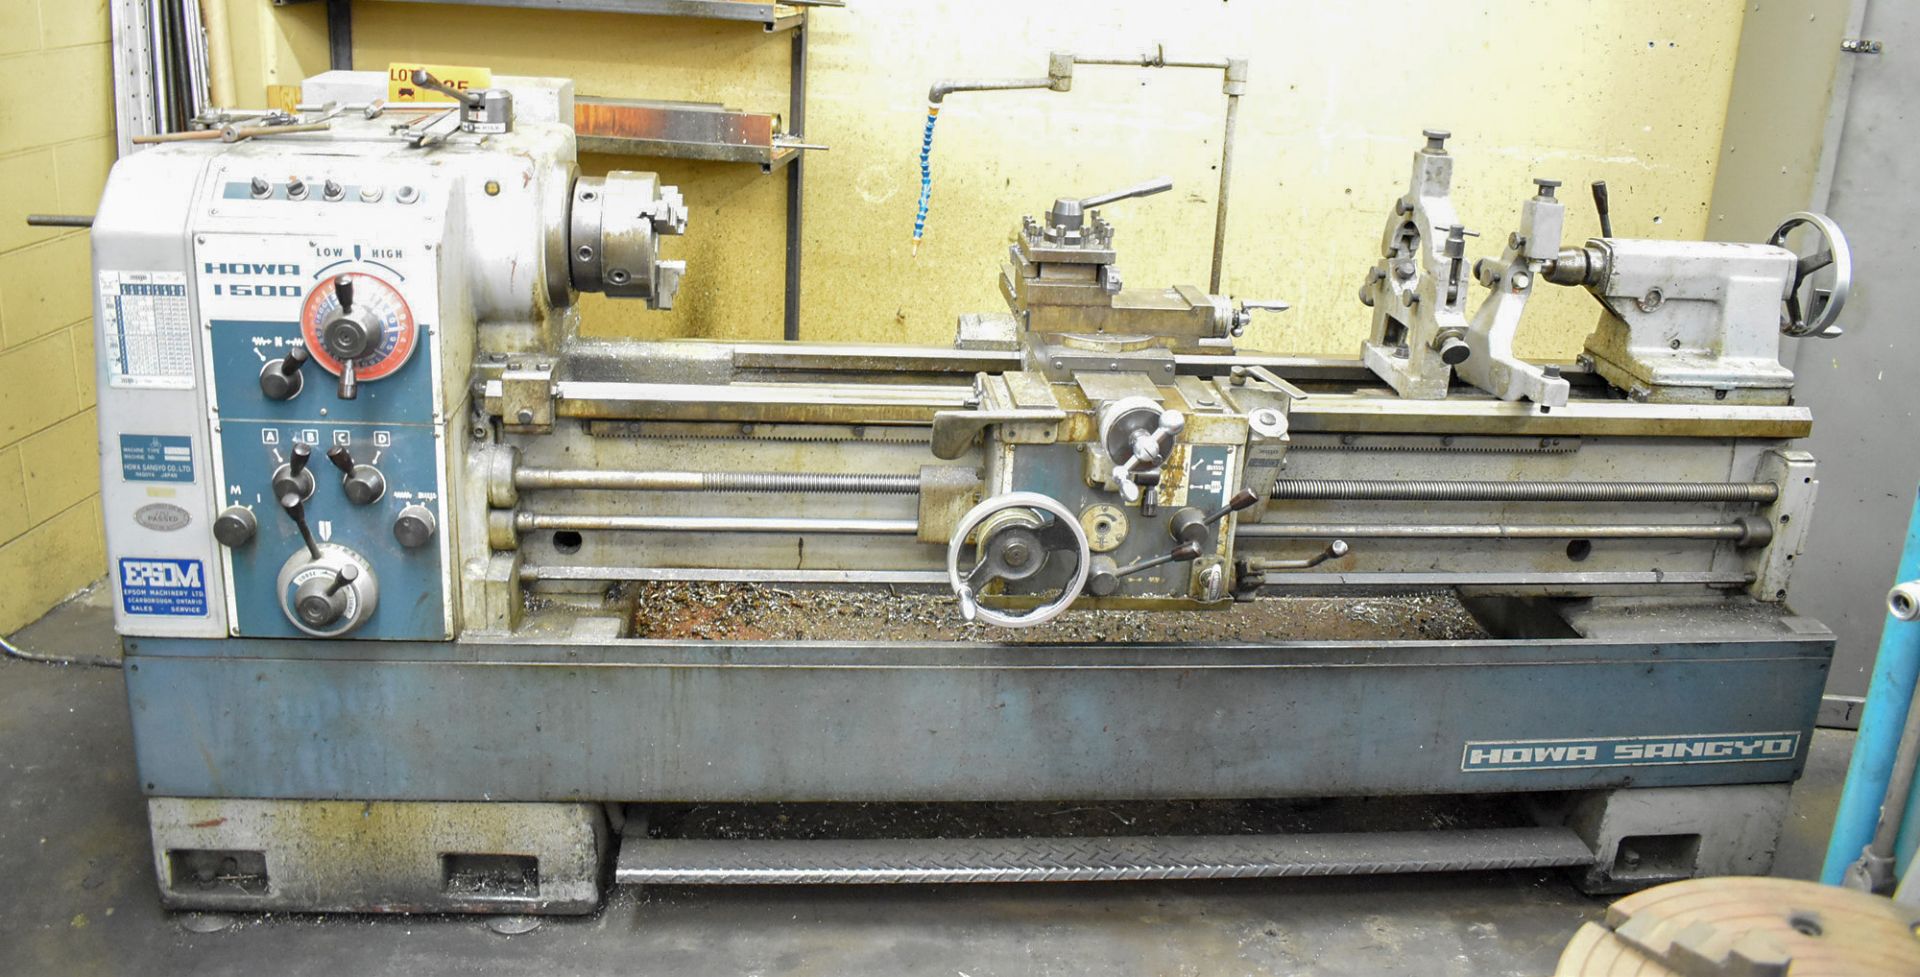 HOWA SANGYO 430X1500 ENGINE LATHE WITH 20" SWING, 60" BETWEEN CENTERS, 8" 3-JAW CHUCK, SPEEDS TO - Image 2 of 4